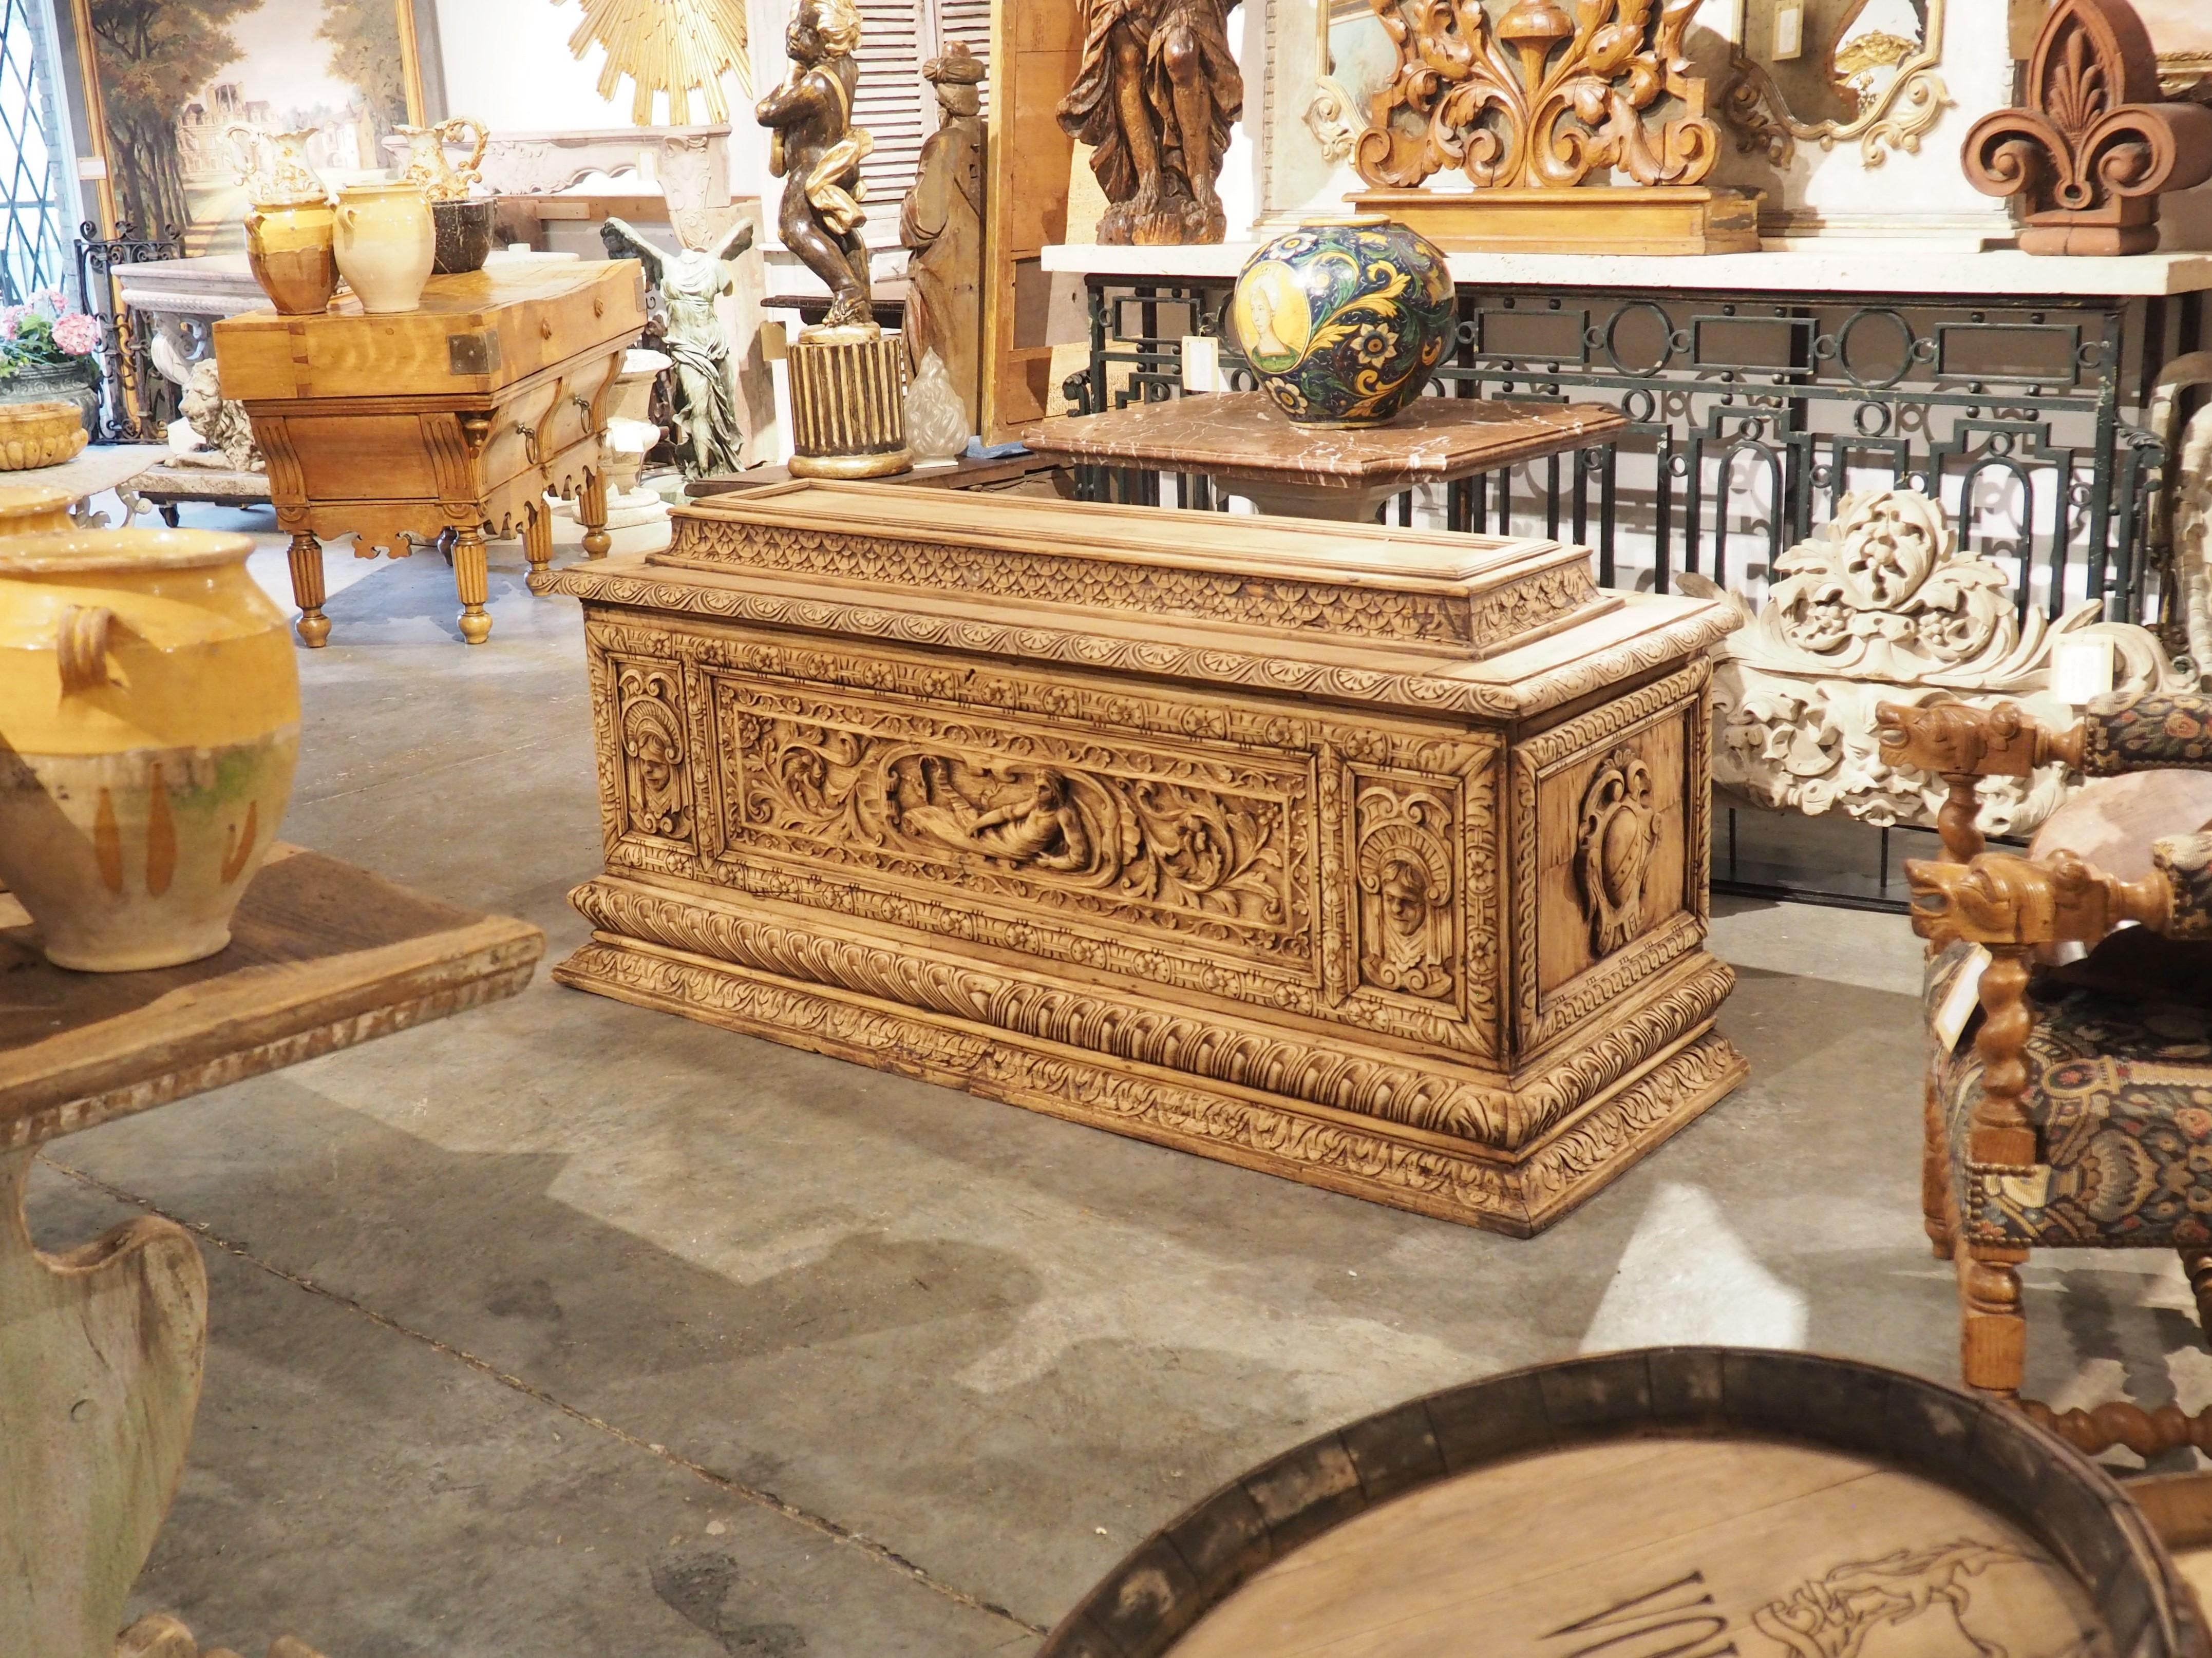 From Italy, circa 1900, this large and impressive Italian cassone has been hand carved in the Renaissance style. A cassone is a lavishly worked trunk that was often given as a wedding dowry. It was an important piece of furniture, providing storage